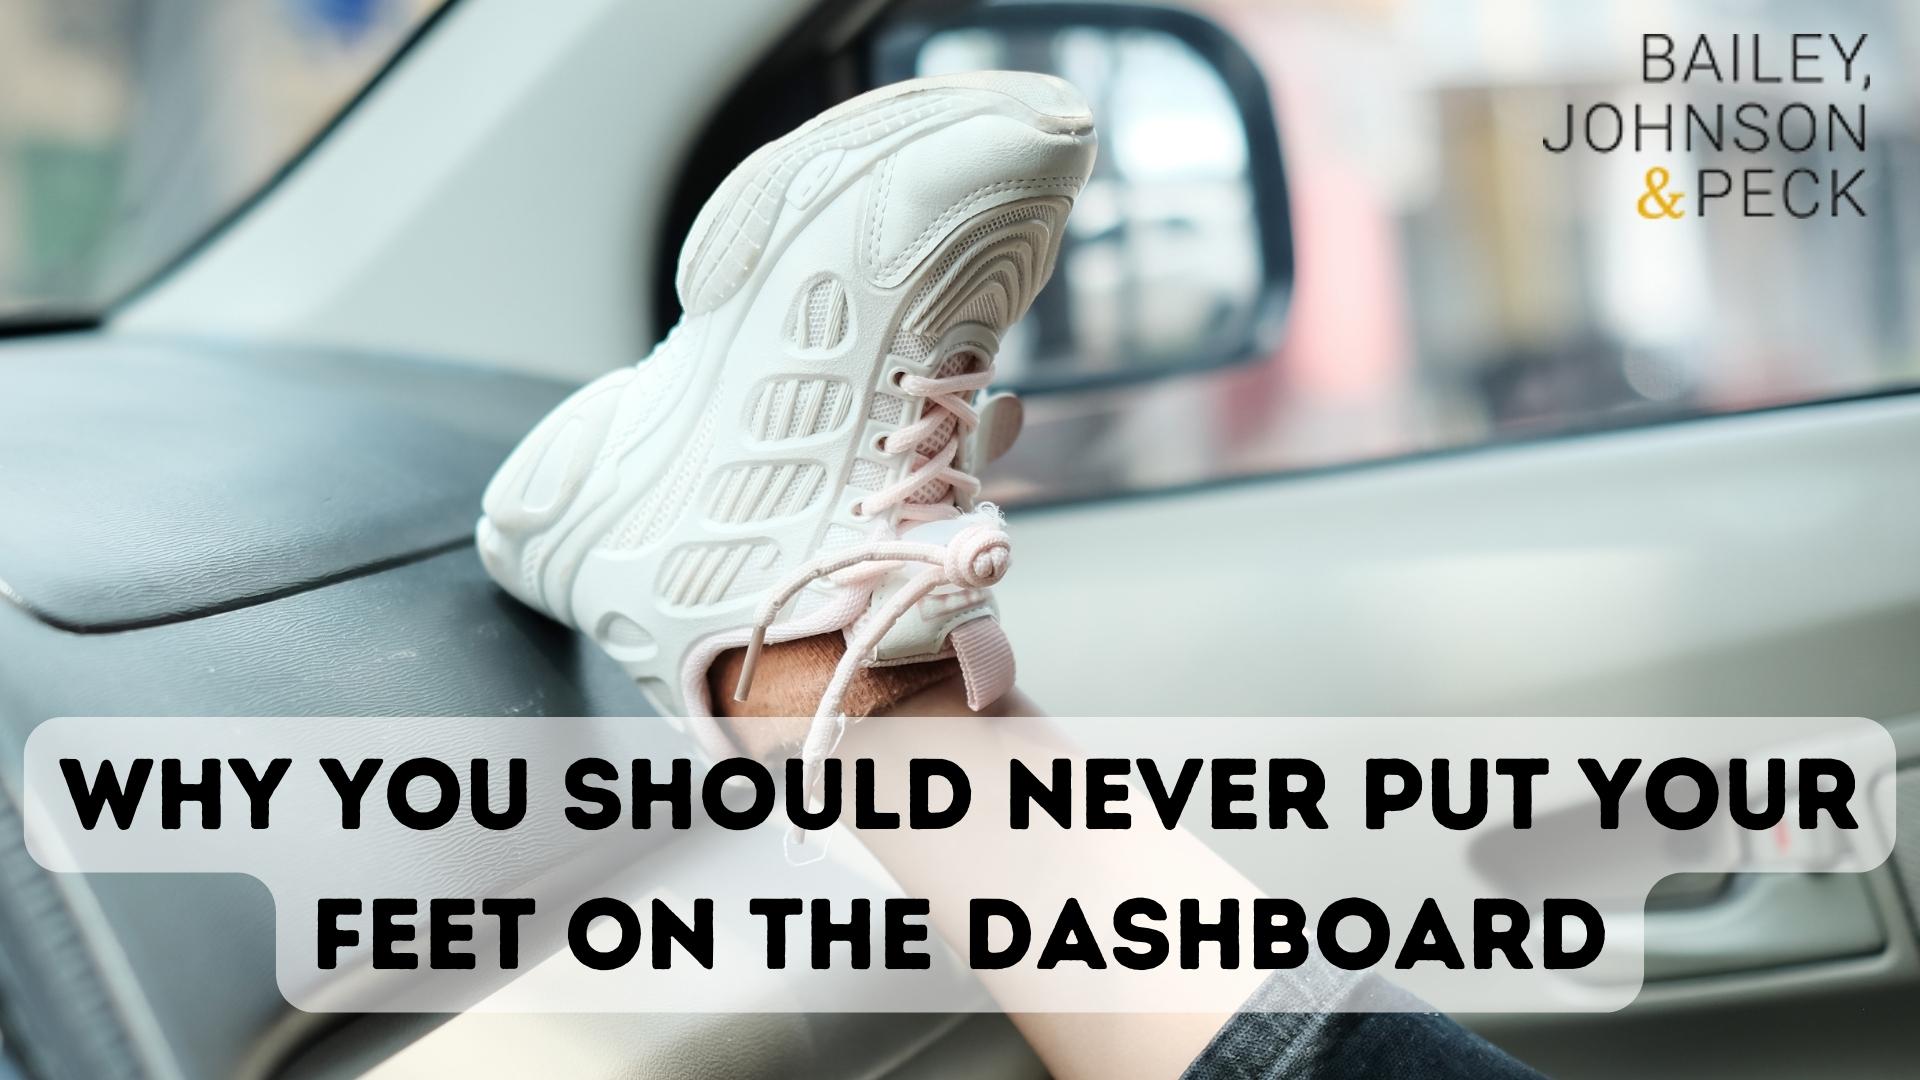 Why You Should Never Put Your Feet on the Dashboard